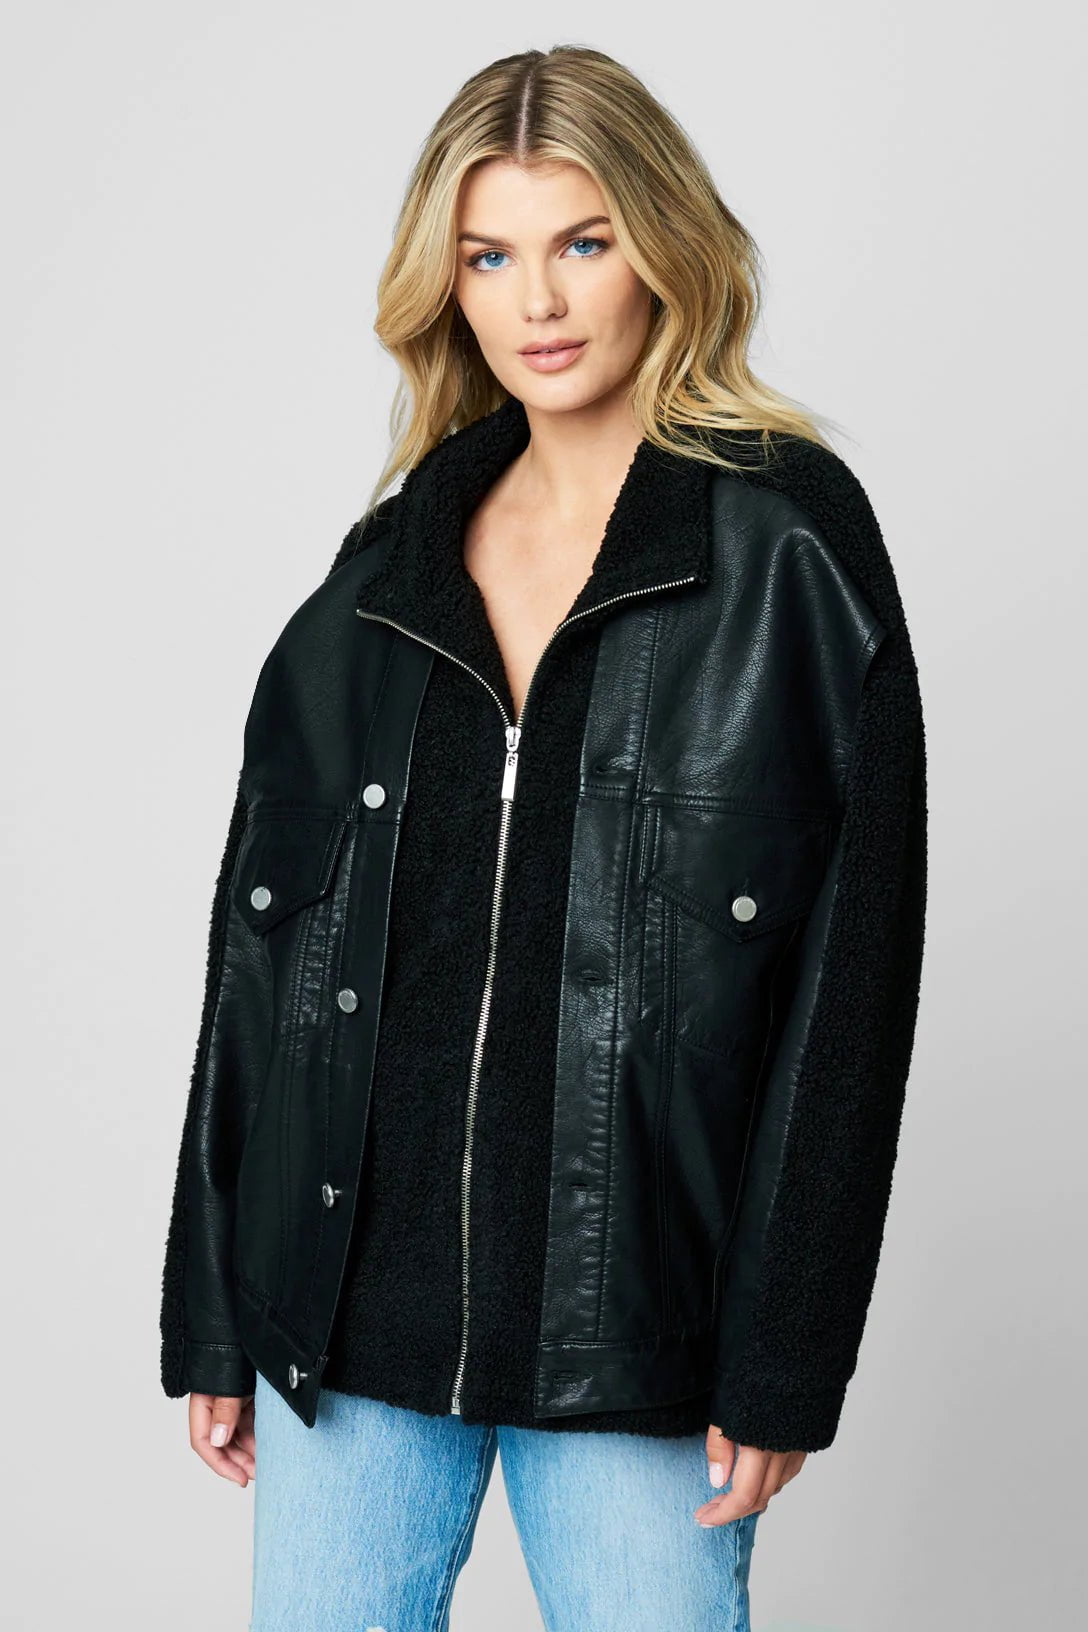 Edge to Edge Leather Sherpa Jacket Black, Jacket by Blank NYC | LIT Boutique